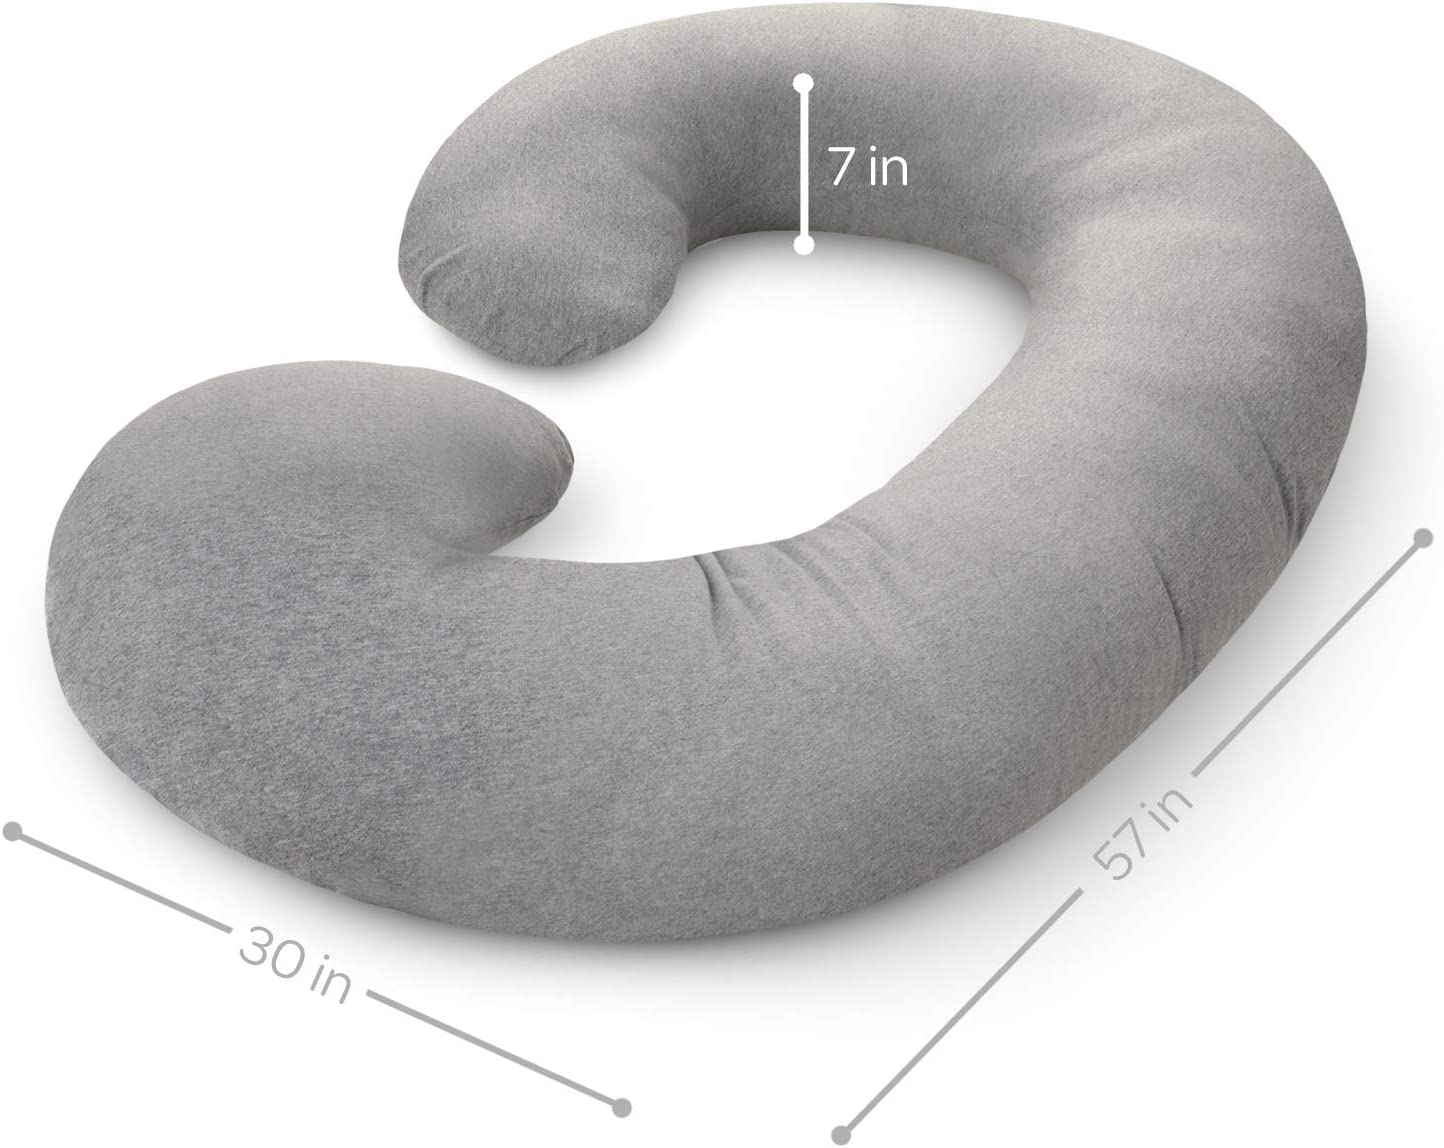 PharMeDoc Pregnancy Pillow - C-Shaped Body Pillow for Pregnant Women - Jersey Cover, Gray - image 4 of 6